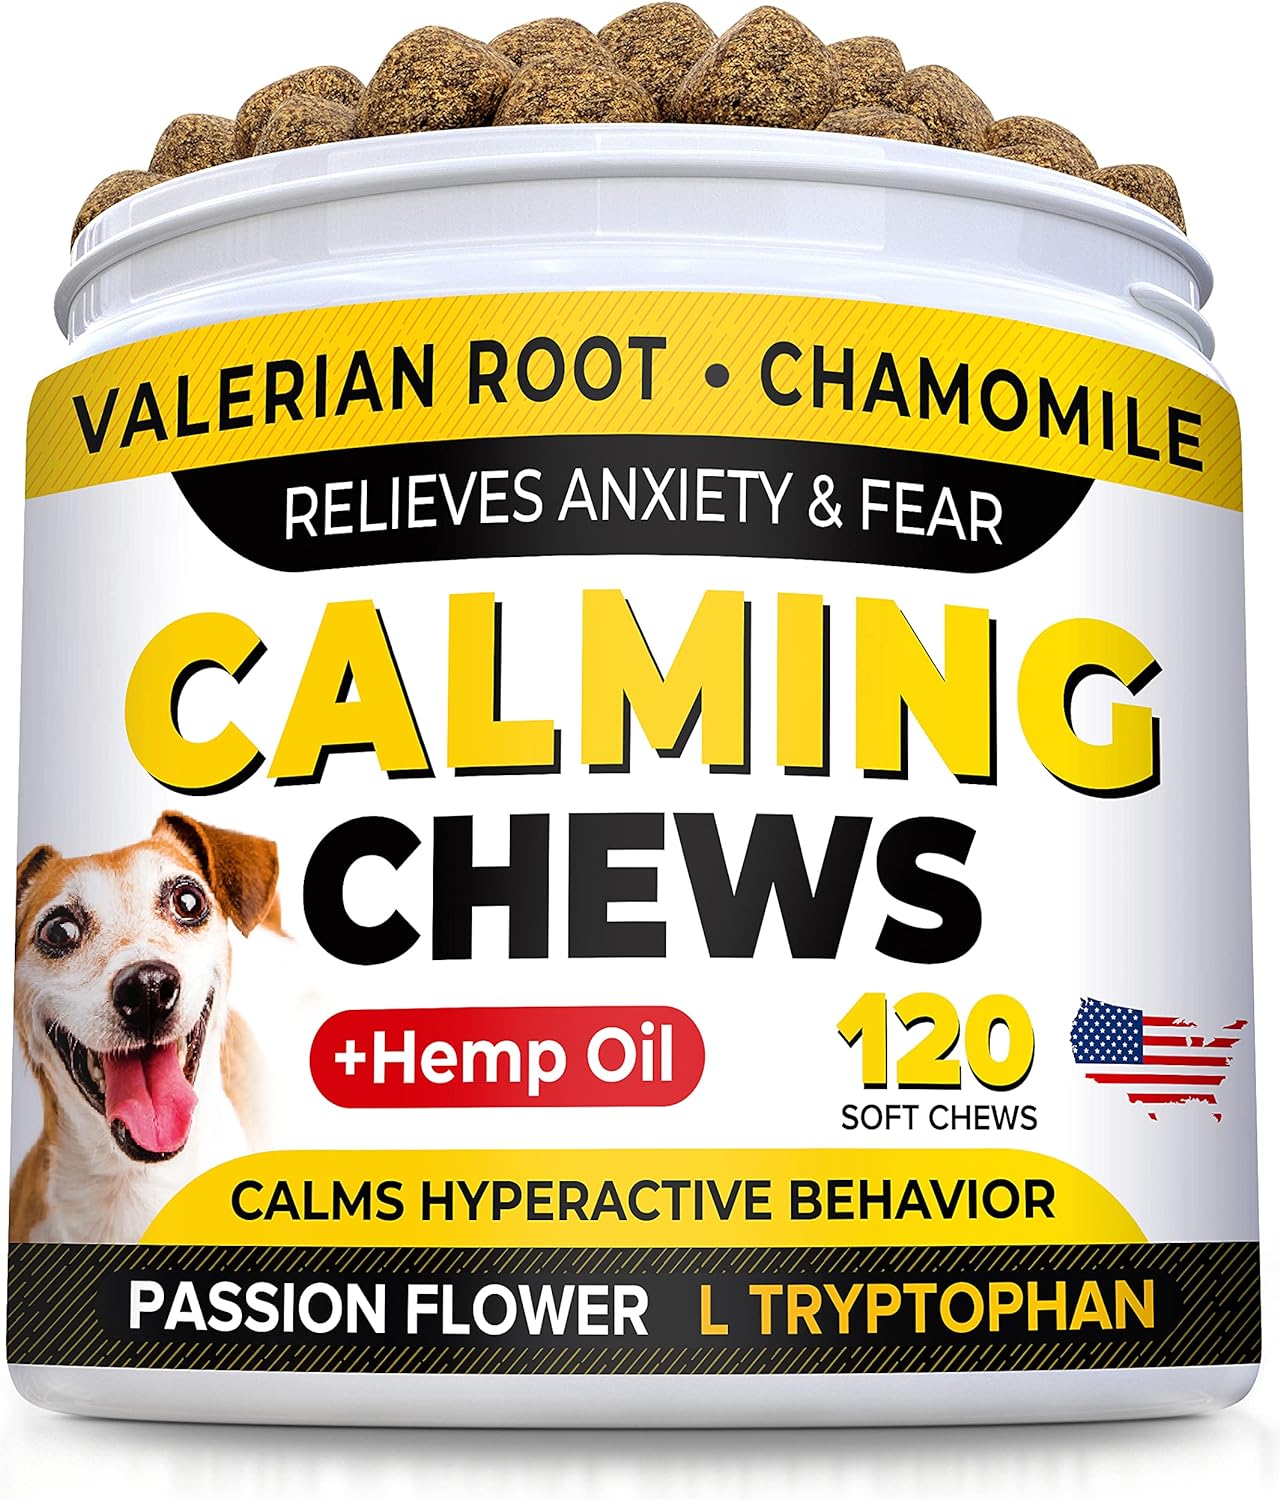 STRELLALAB Hemp Calming Chews for Dogs - Dog Anxiety & Stress Relief Treats - Dog Treats for Separation Anxiety Relief & Fireworks for All Breeds & Sizes